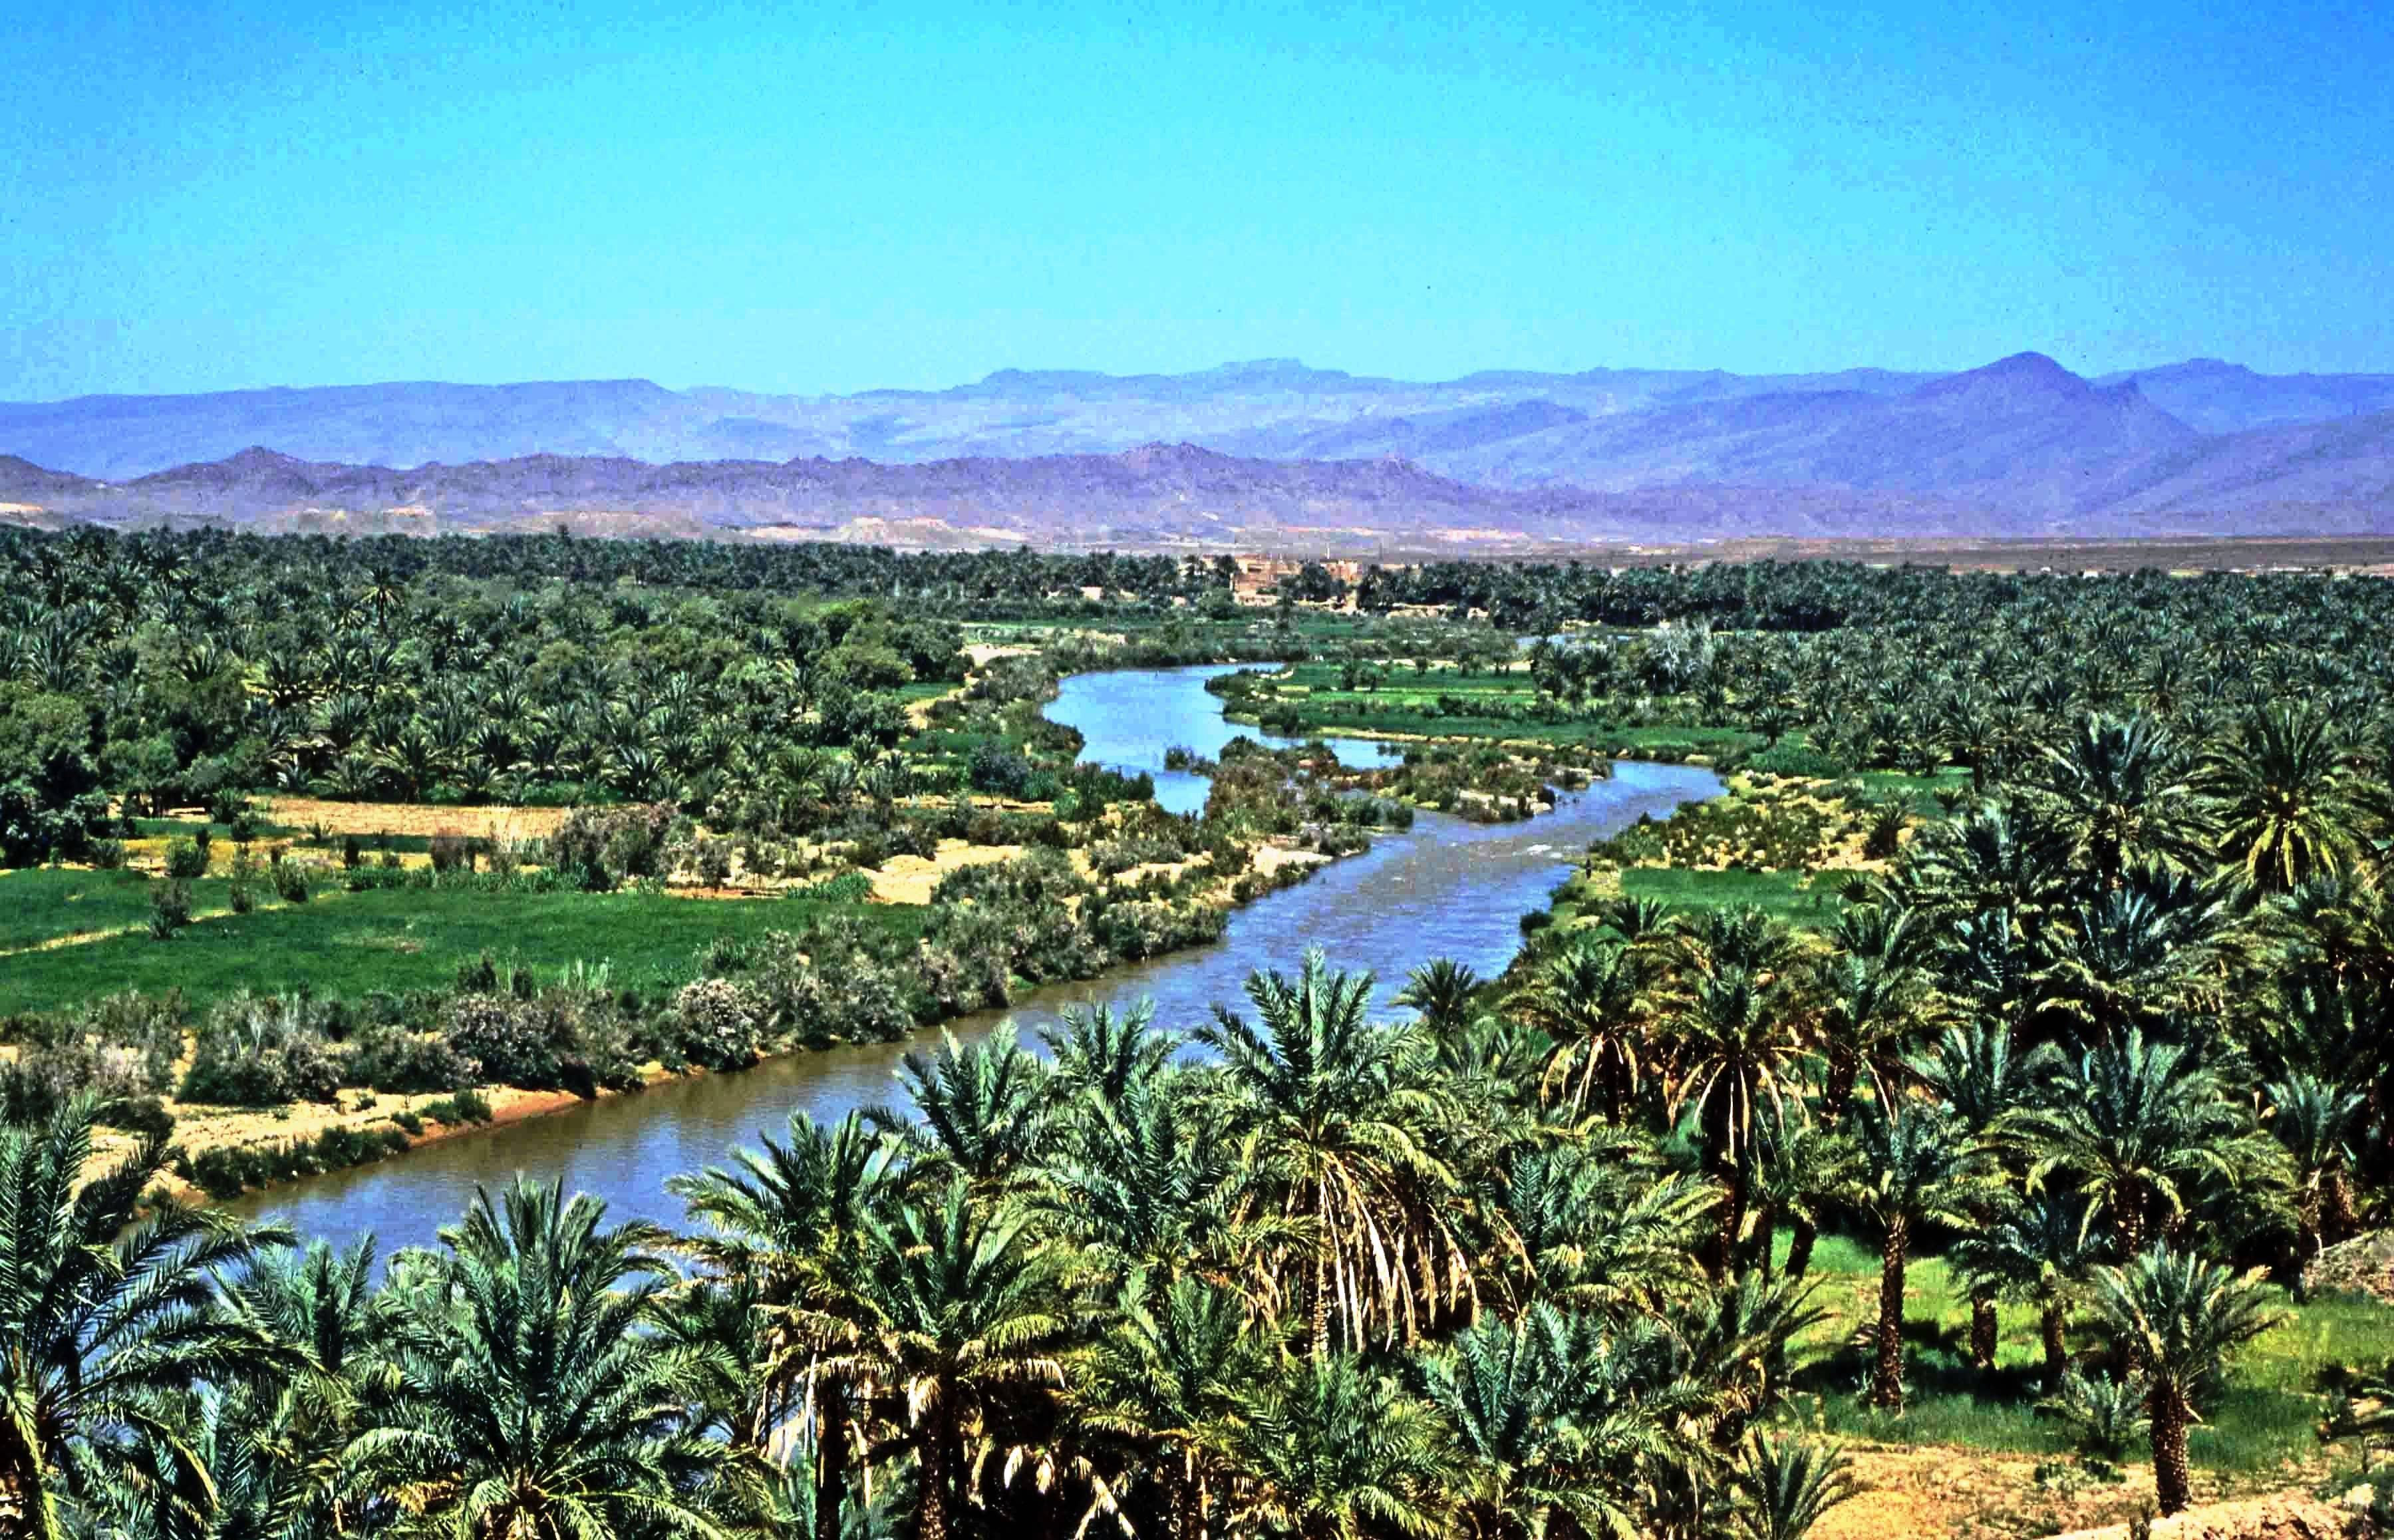 10 days exotic Morocco discovery tour from Marrakech to explore Morocco